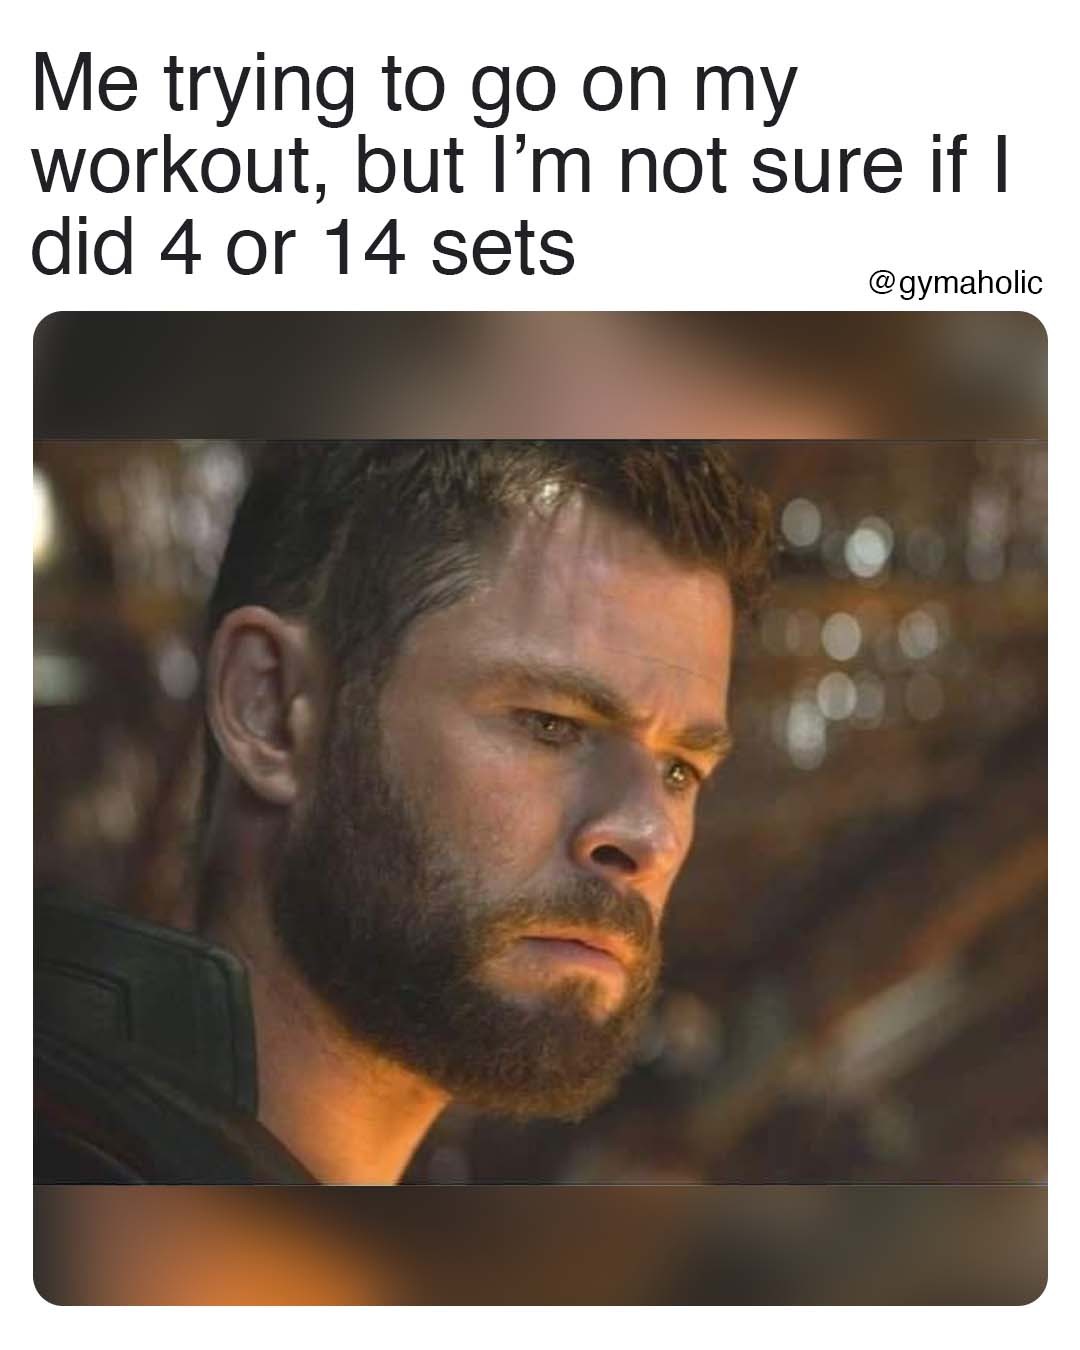 Me trying to go on my workout